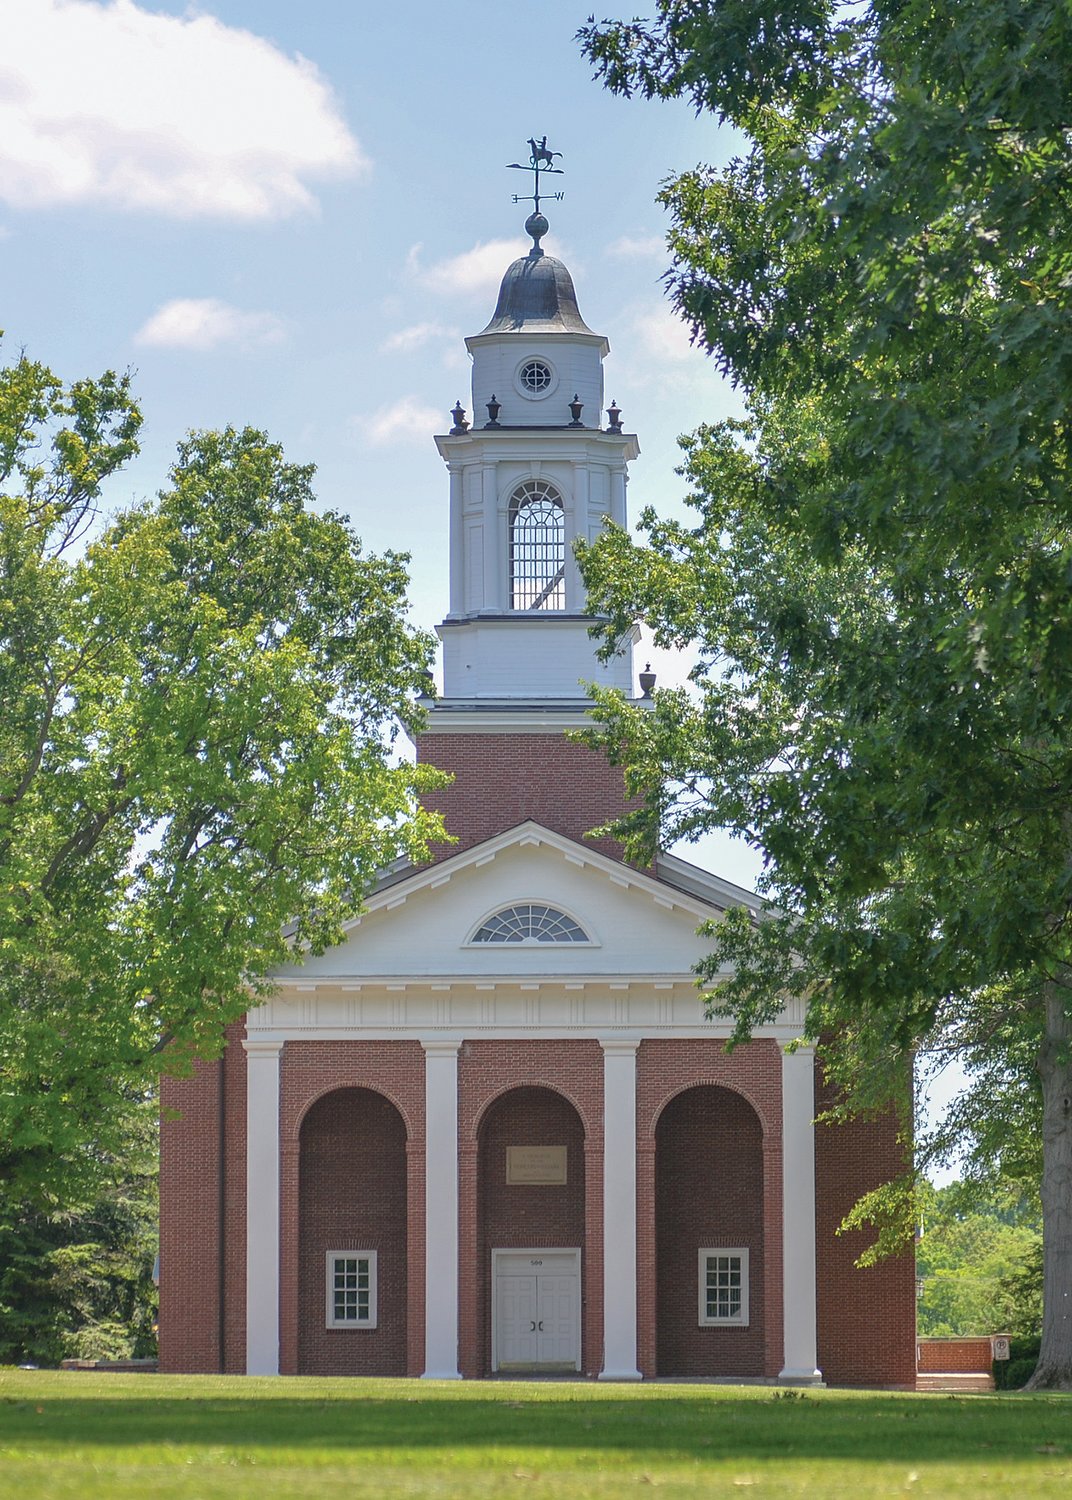 Wabash College continues to be ranked in the Top Tier of National Liberal Arts Colleges according to U.S. News & World Report in its annual Best Colleges rankings, which were released Monday. Pictured here is the Wabash Chapel.